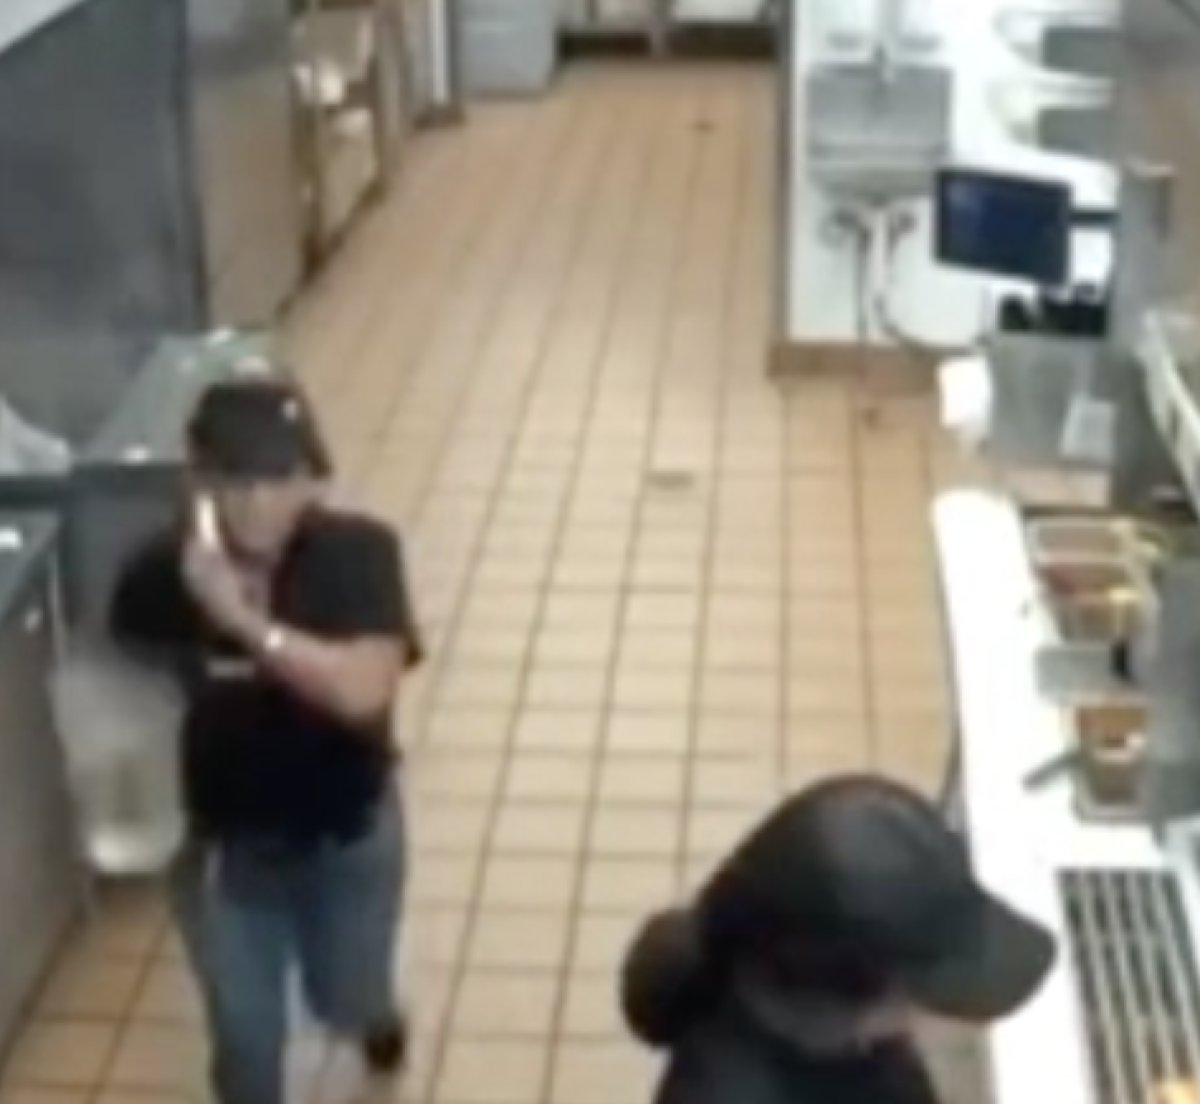 Restaurant manager in Texas threw boiling water at customers #4